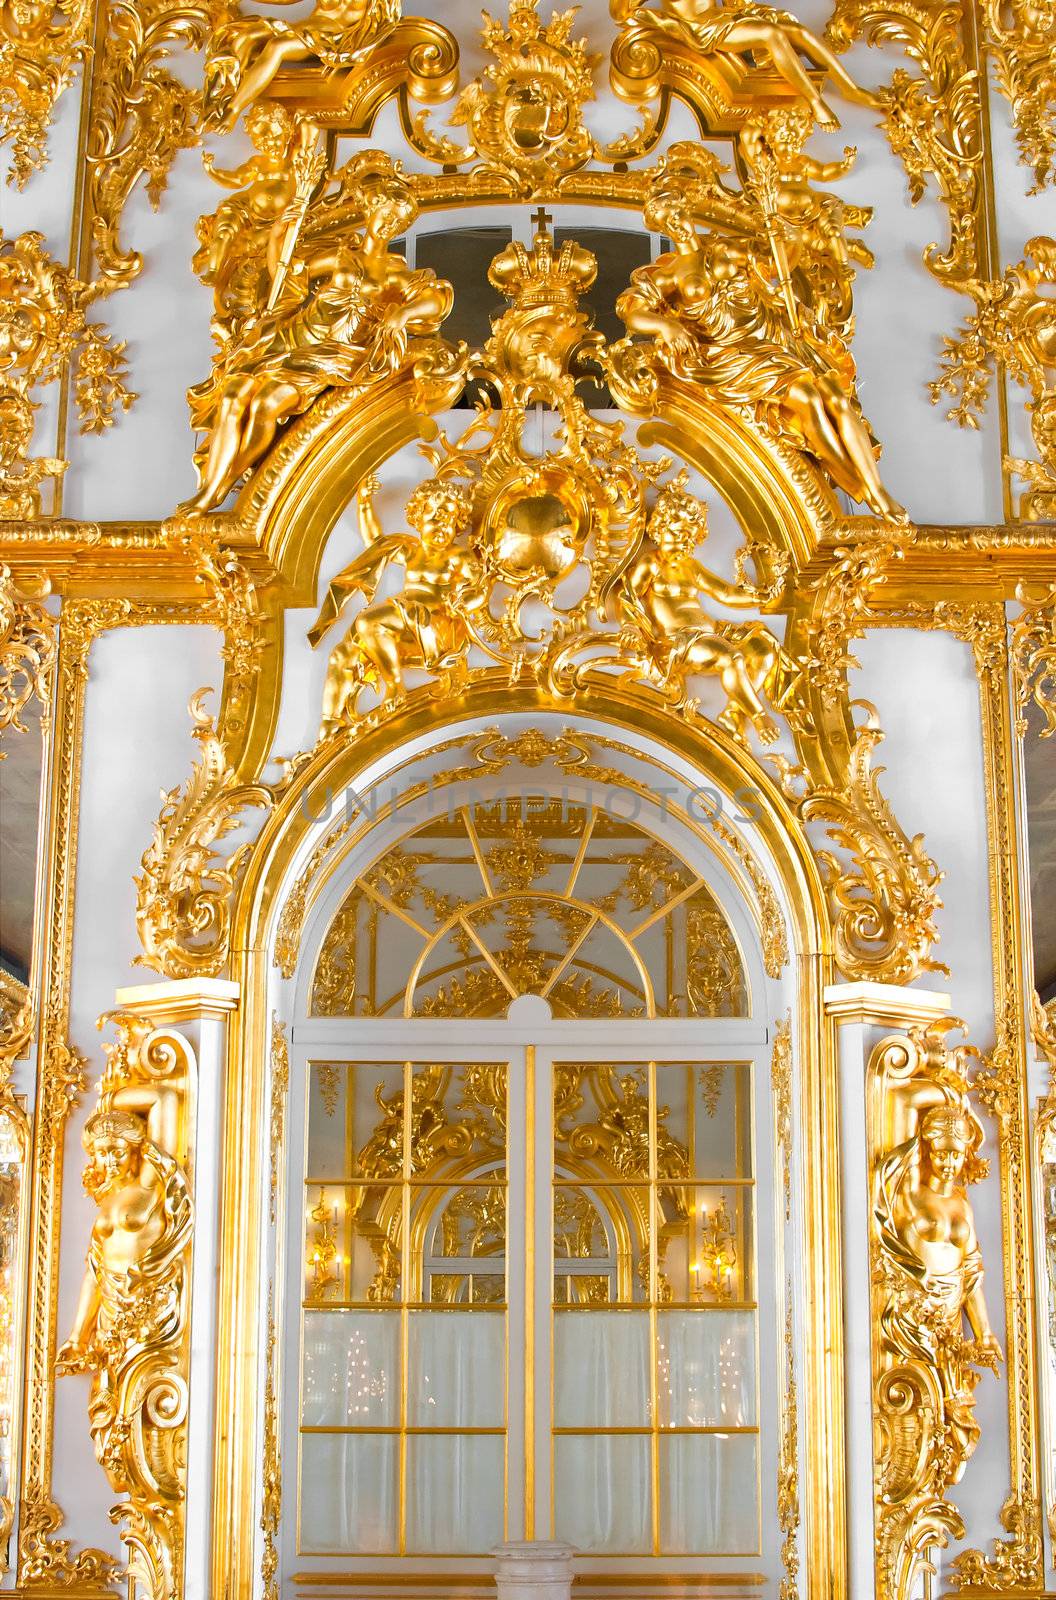 beautiful wall with large door, golden candelabras and decorations in Catherine Palace